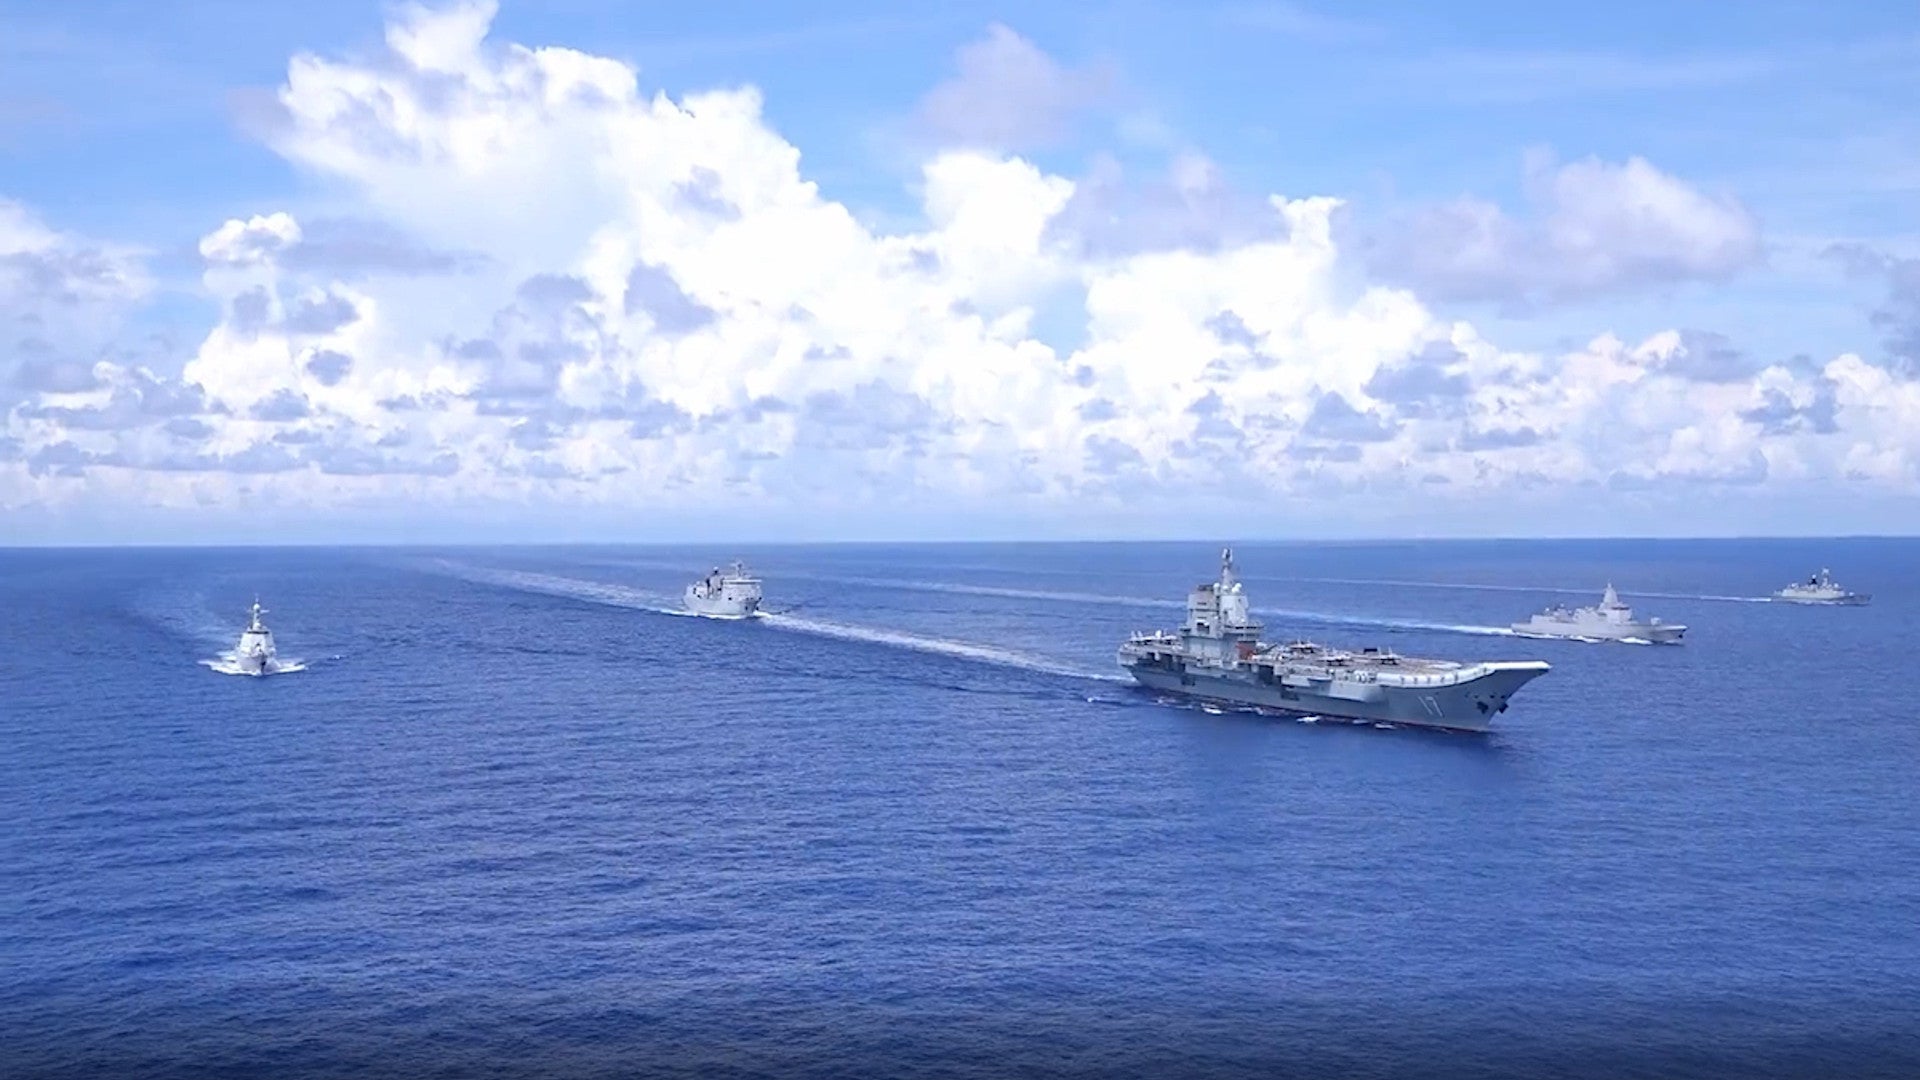 Chinese Carrier Recently Sailed Near Guam, Enters South China Sea